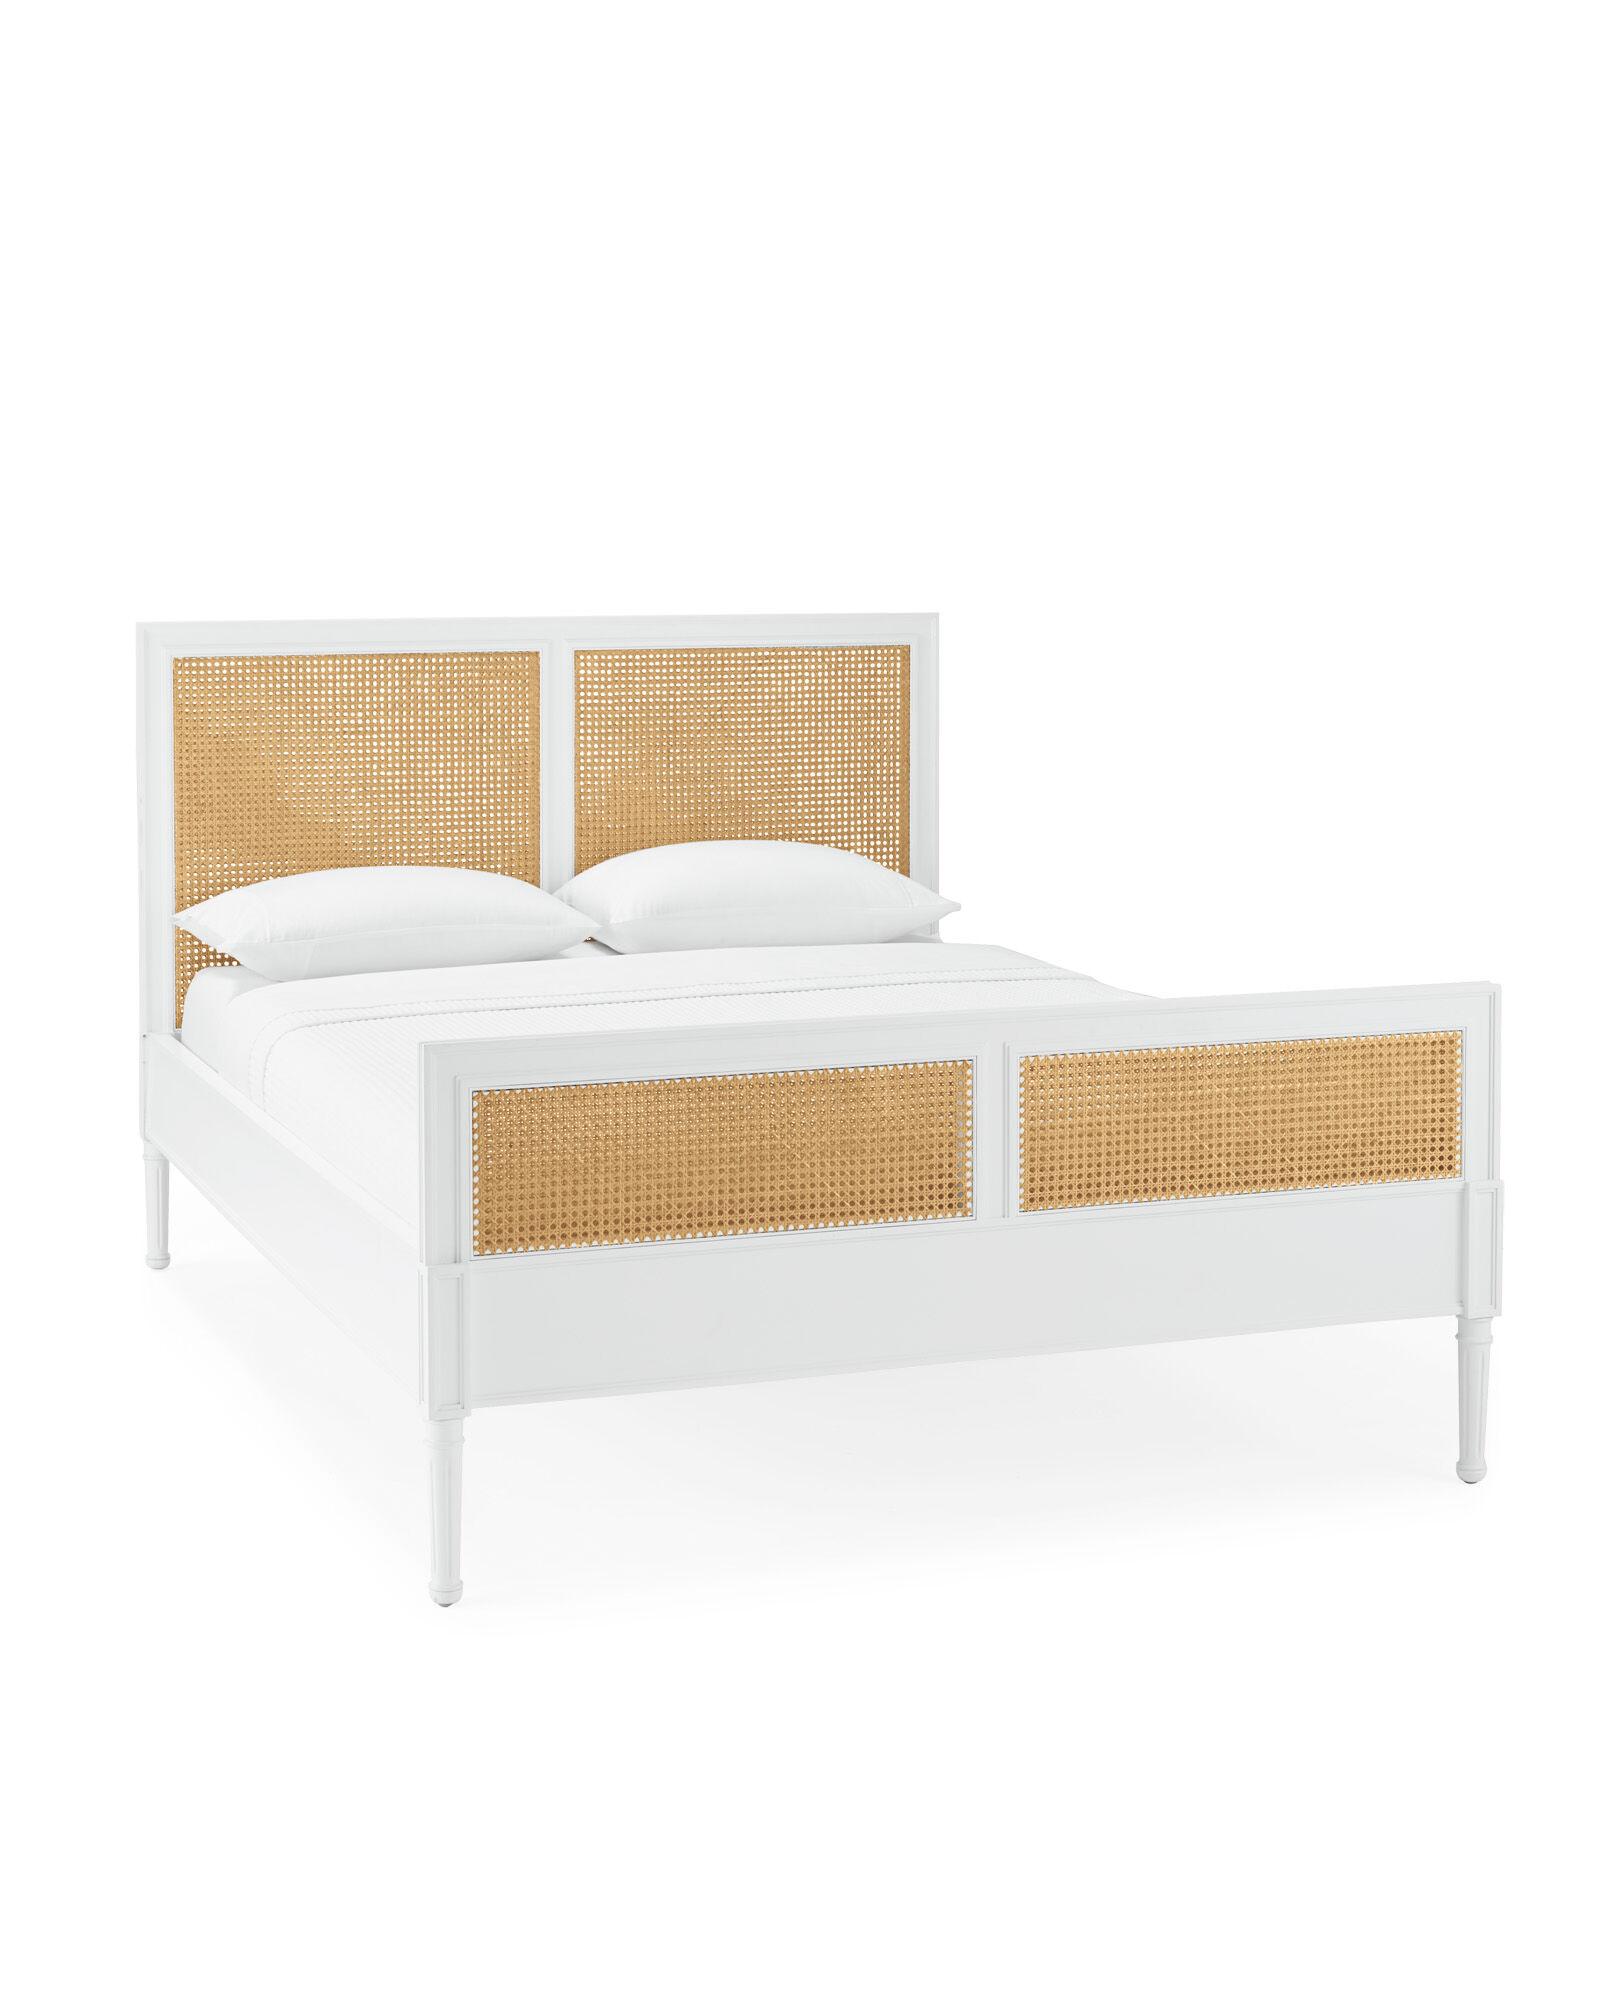 Harbour Cane Bed in White, California King | Serena & Lily